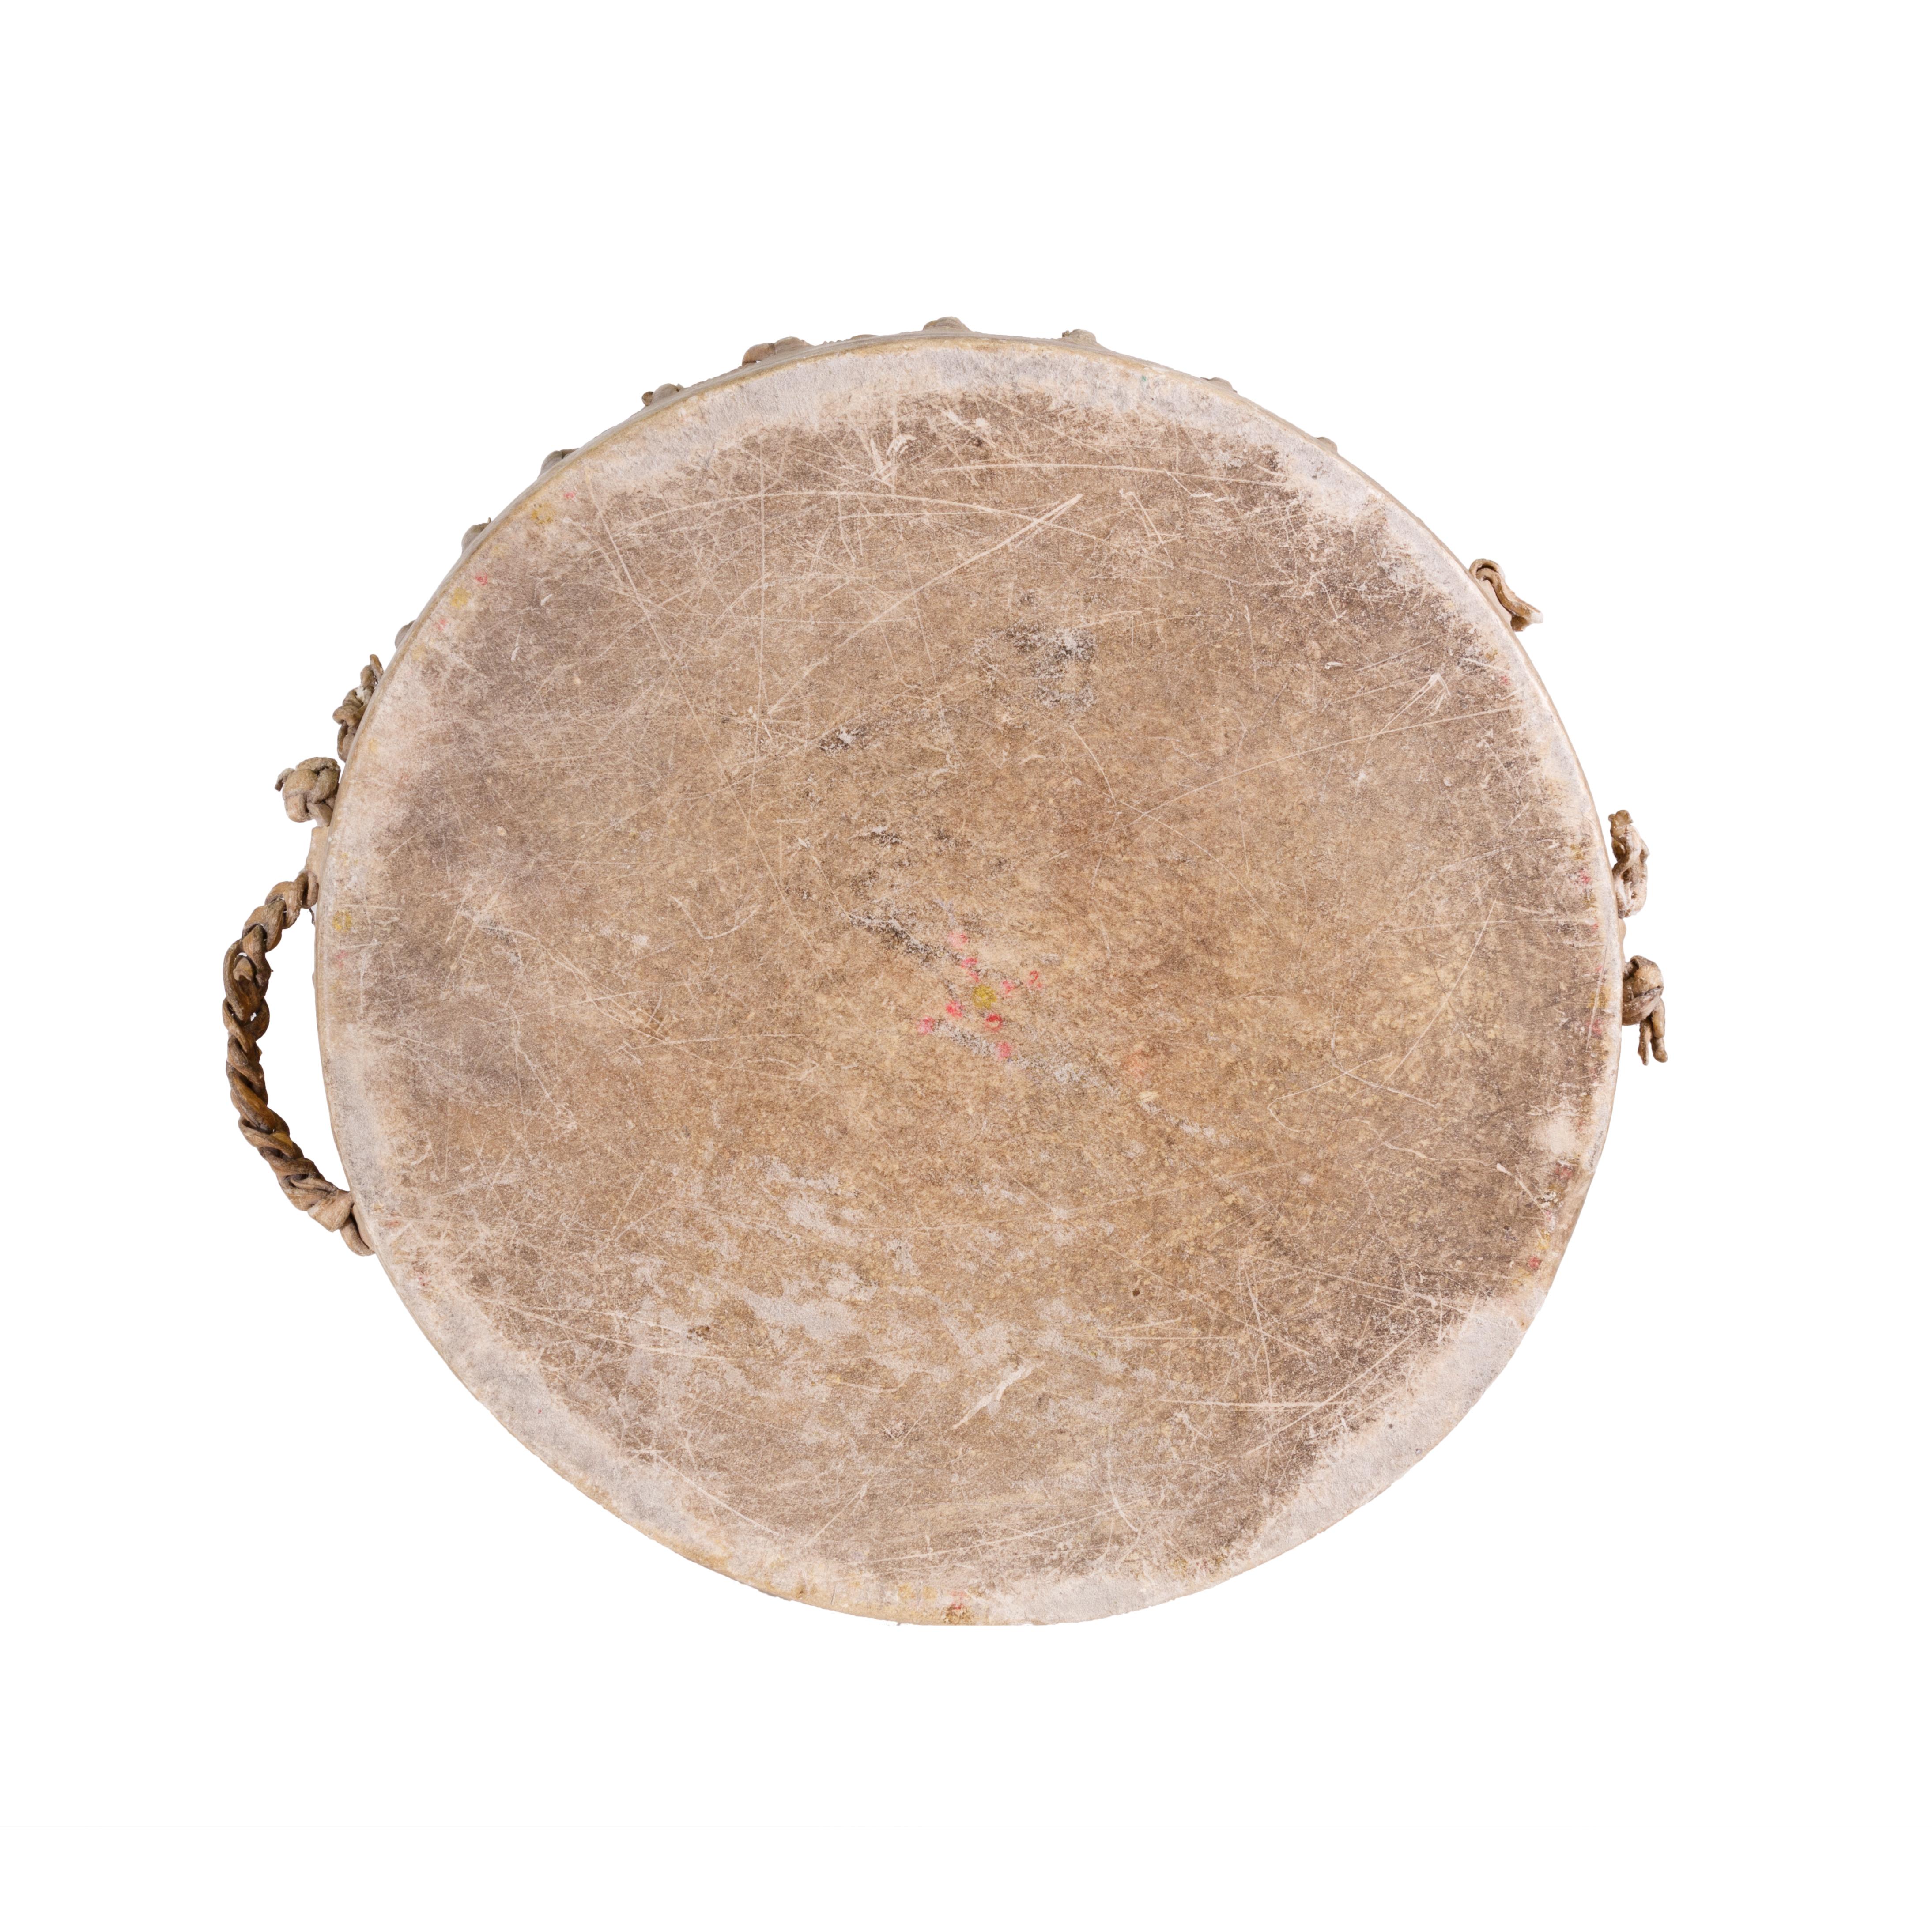 Native American Pueblo drum that has seen use. Acquired by Charles Graves, Indian agent, New Mexico, 1930s. One handle missing (chewed off by his dog).

Period: First quarter 20th century

Origin: Pueblo

Size: 13